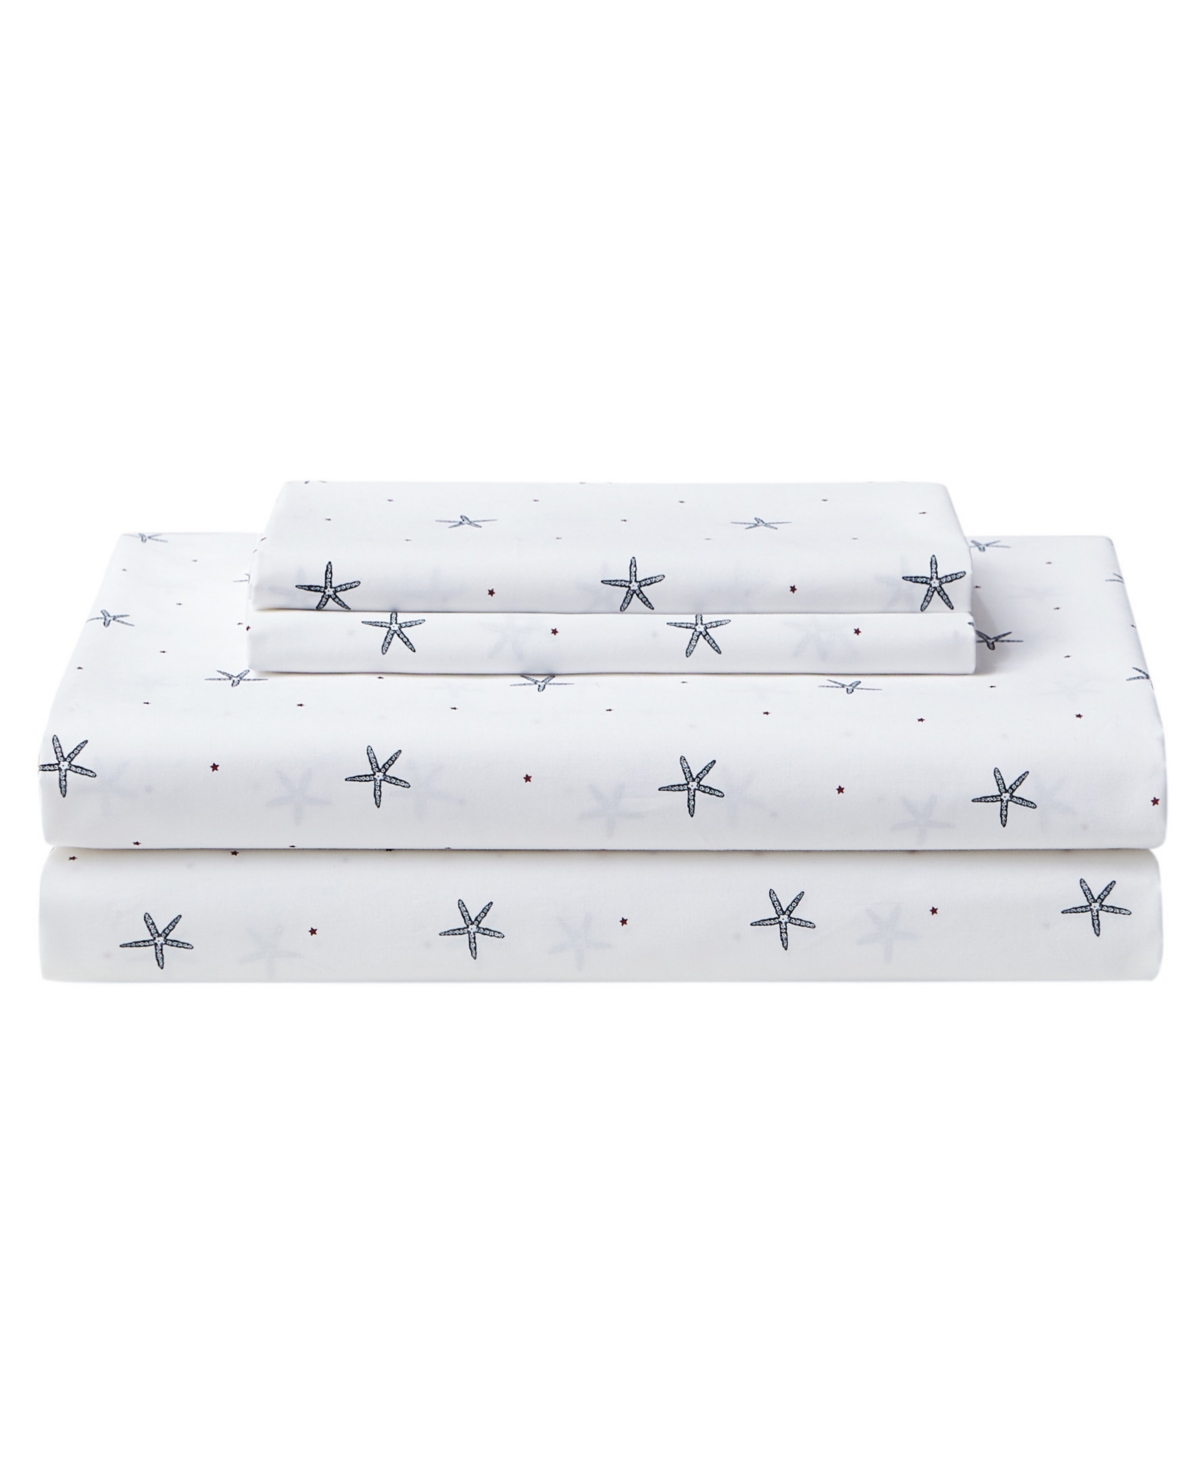 Nautica Star Spangled Coastal Cotton Percale 3-piece Sheet Set, Twin In Navy,red